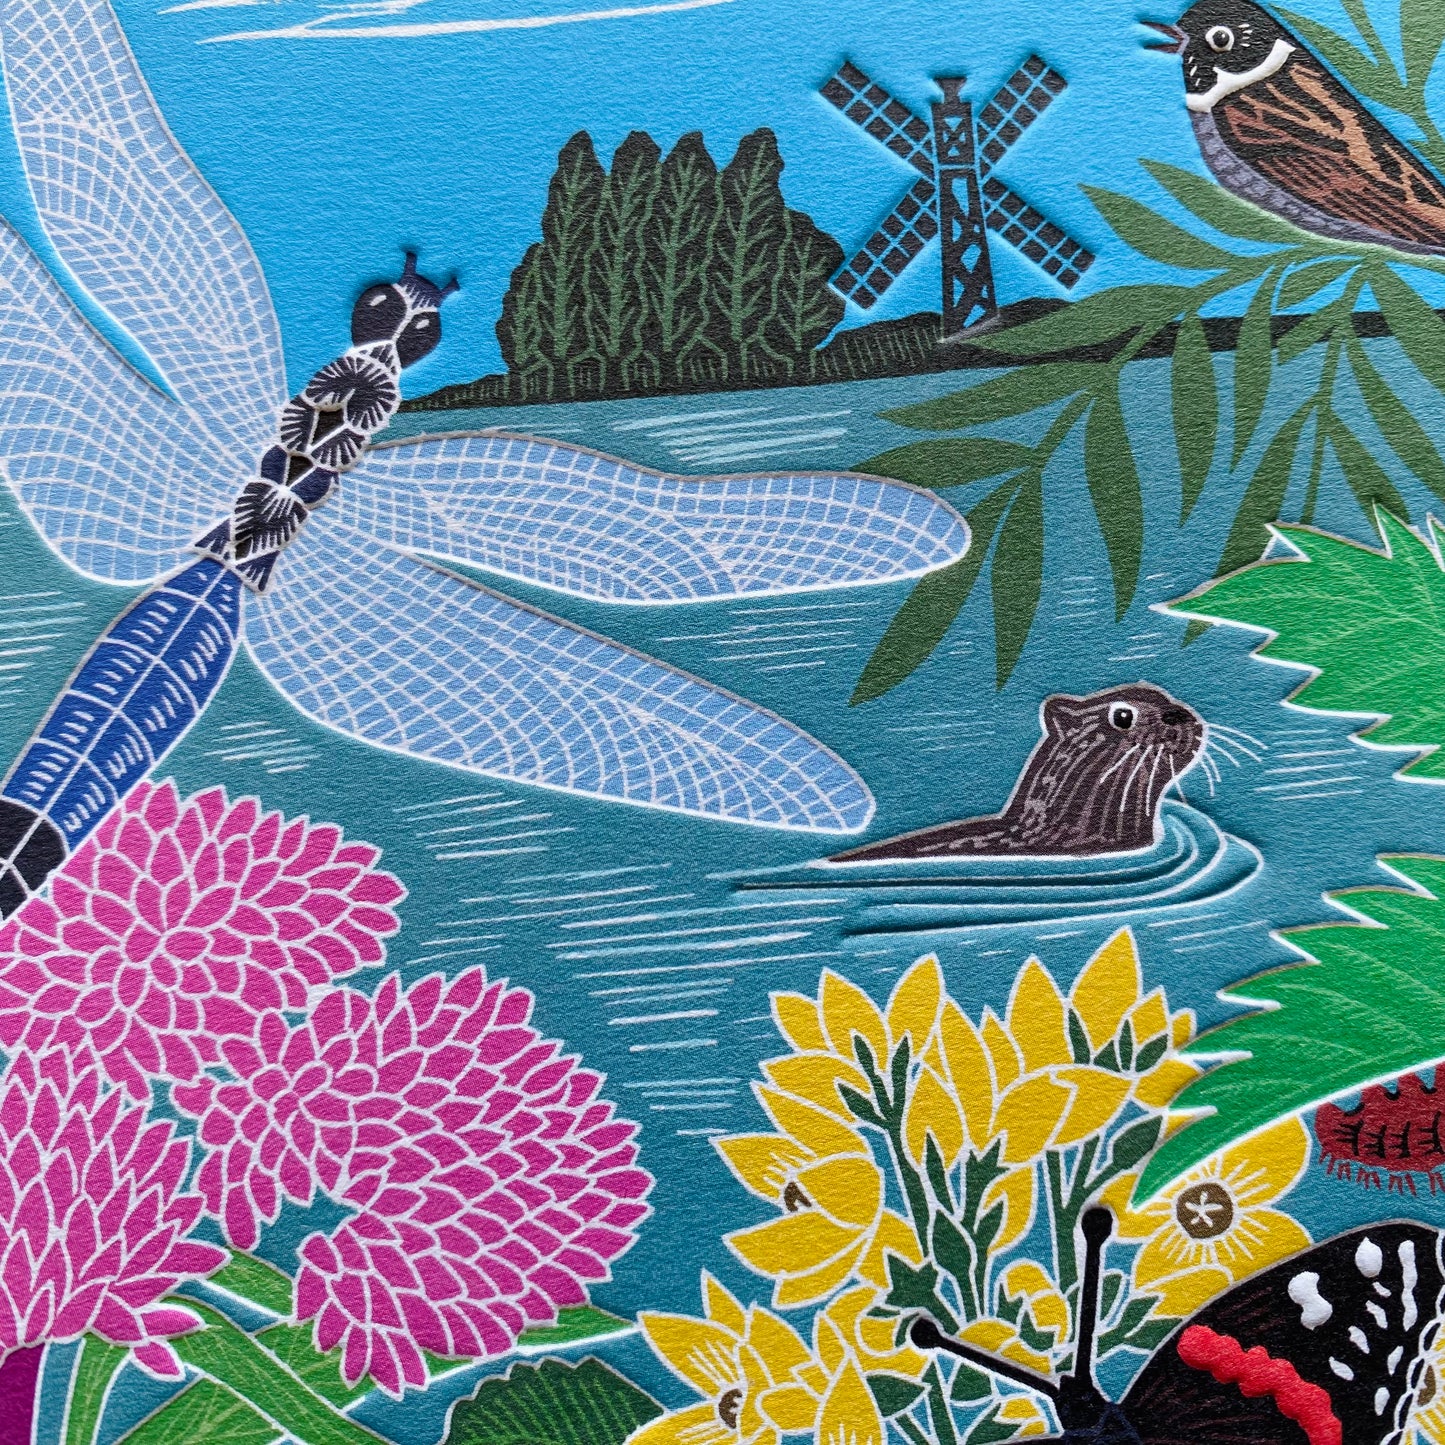 Dragonfly by Kate Heiss, Nature Trail NT24